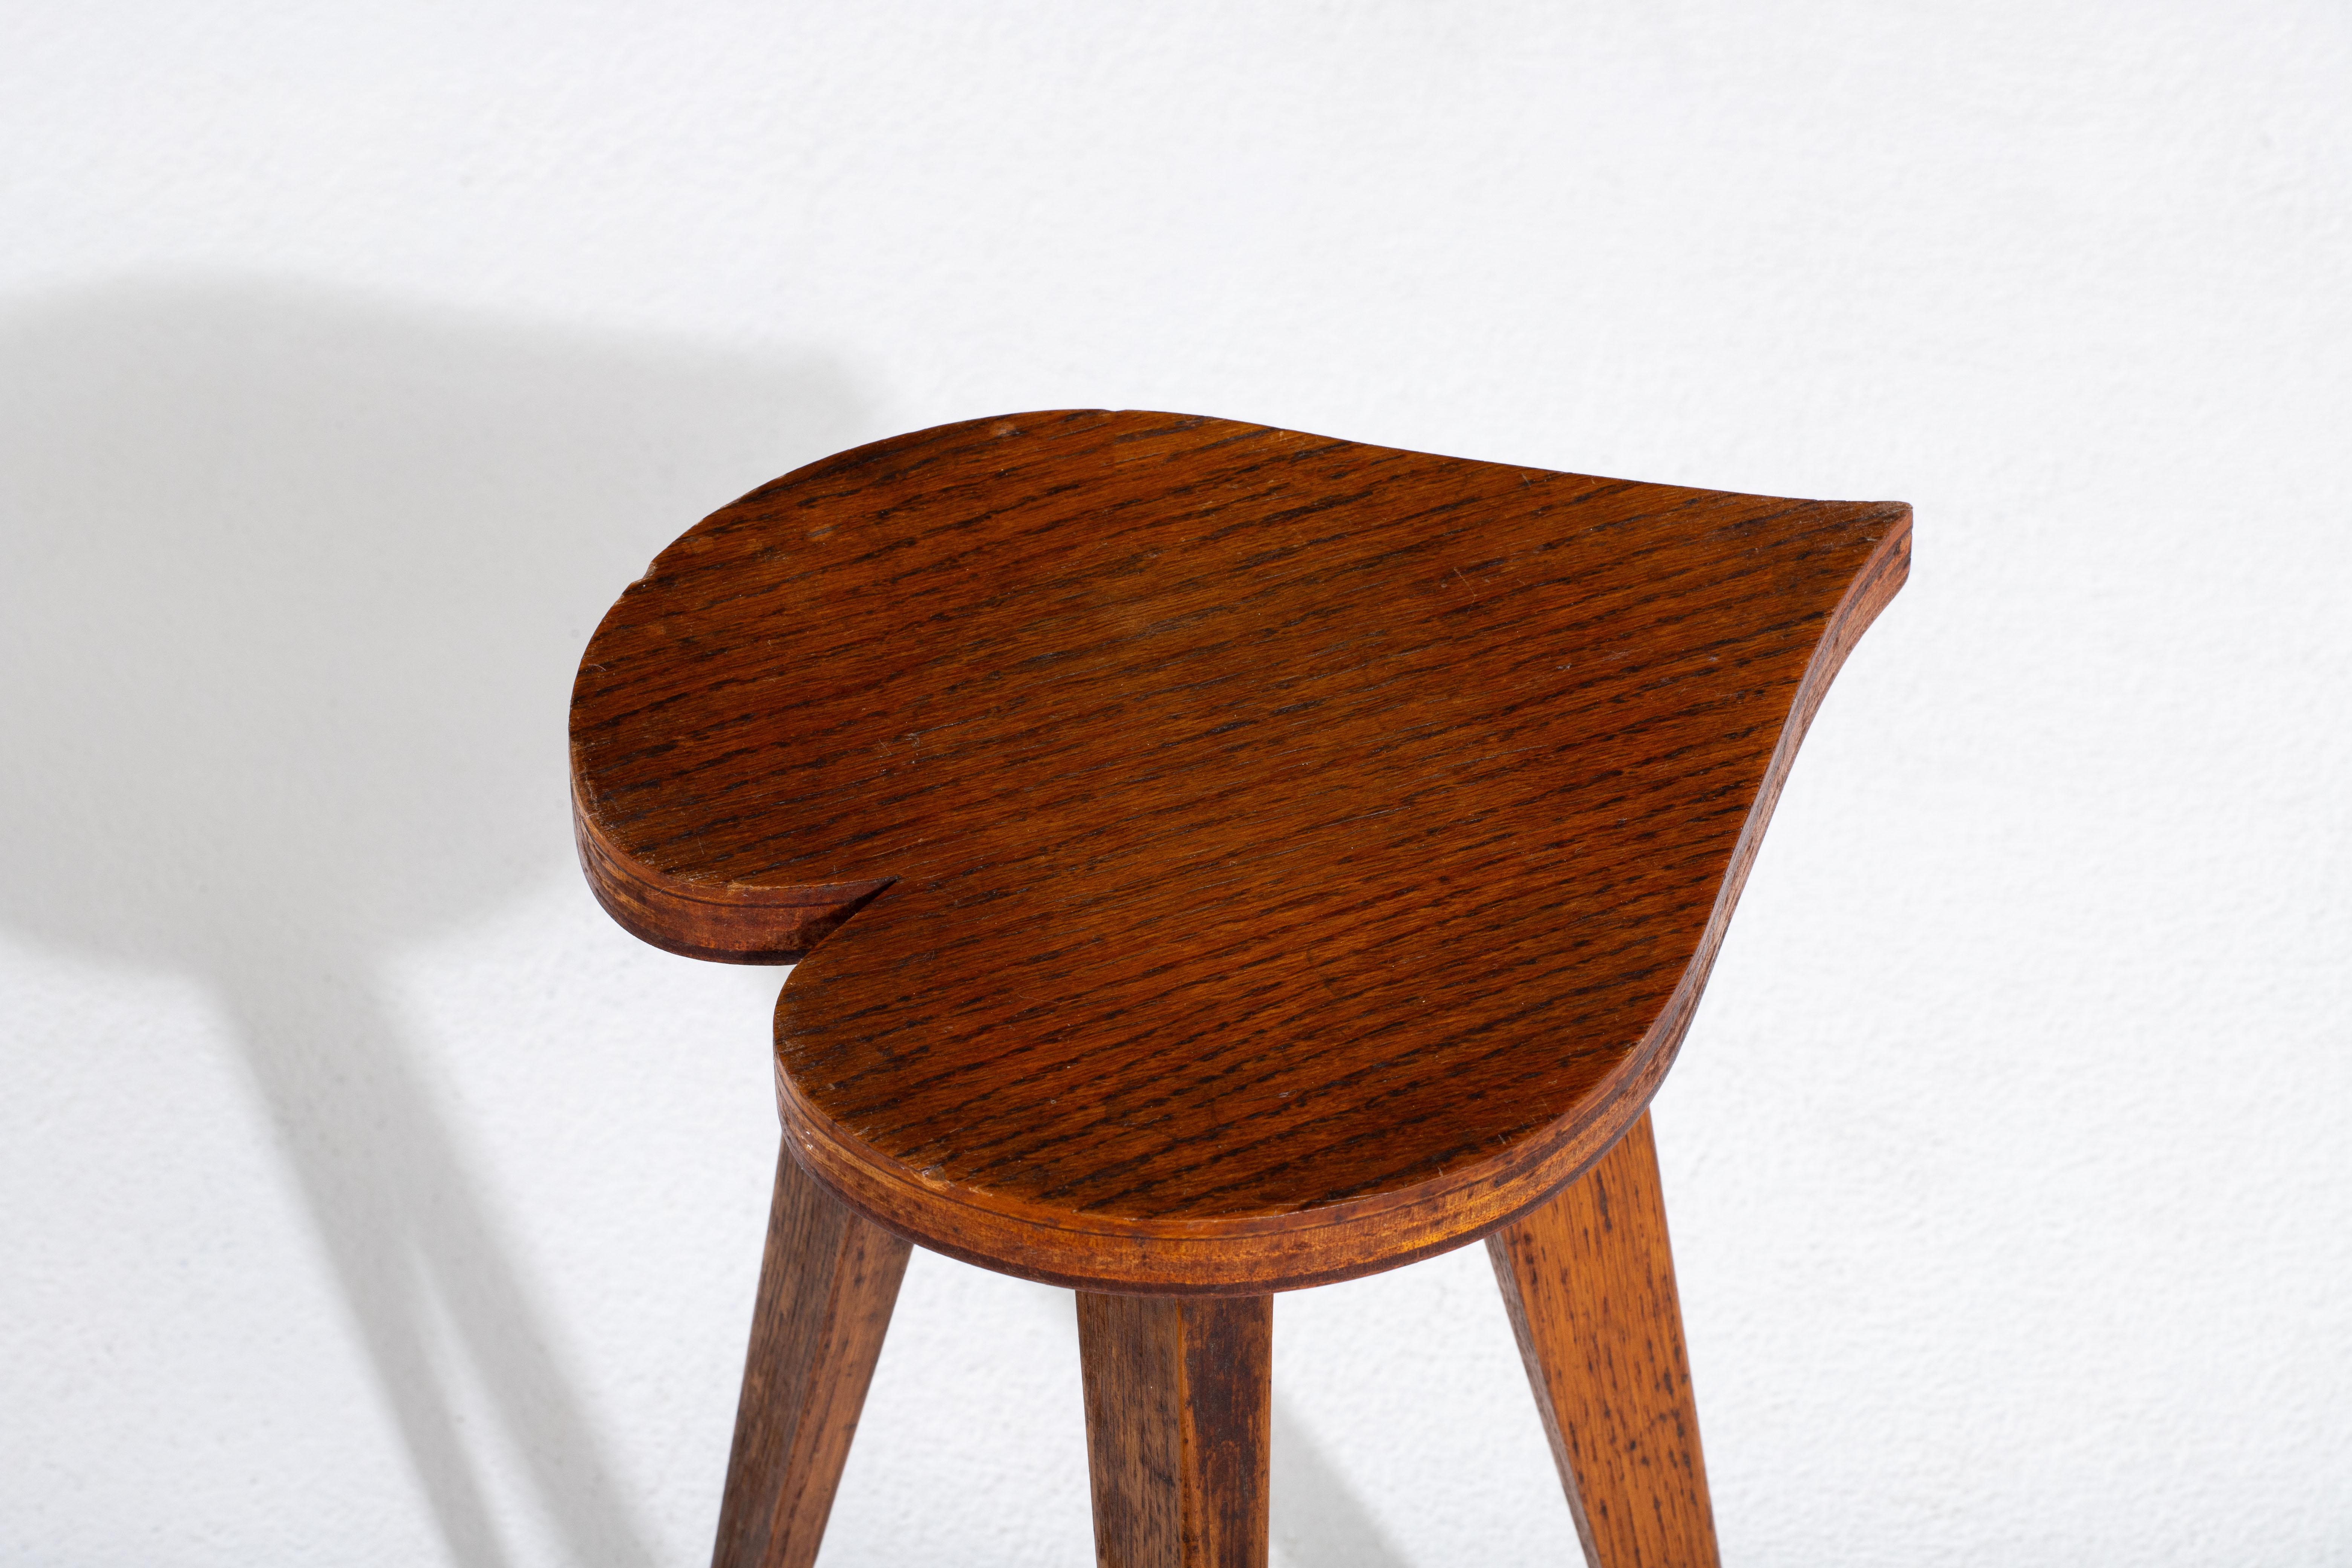 French Midcentury Oak Stool with Heart shaped seat, 1960s, France For Sale